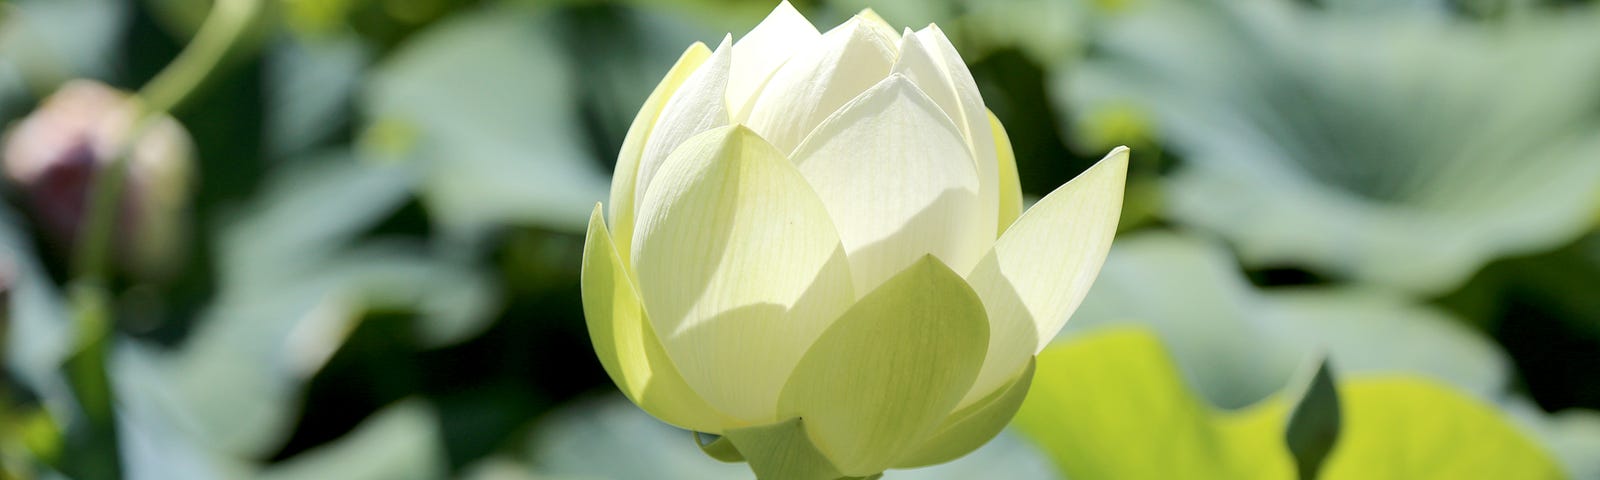 White lotus just opening growing in a pond filled with lily pads